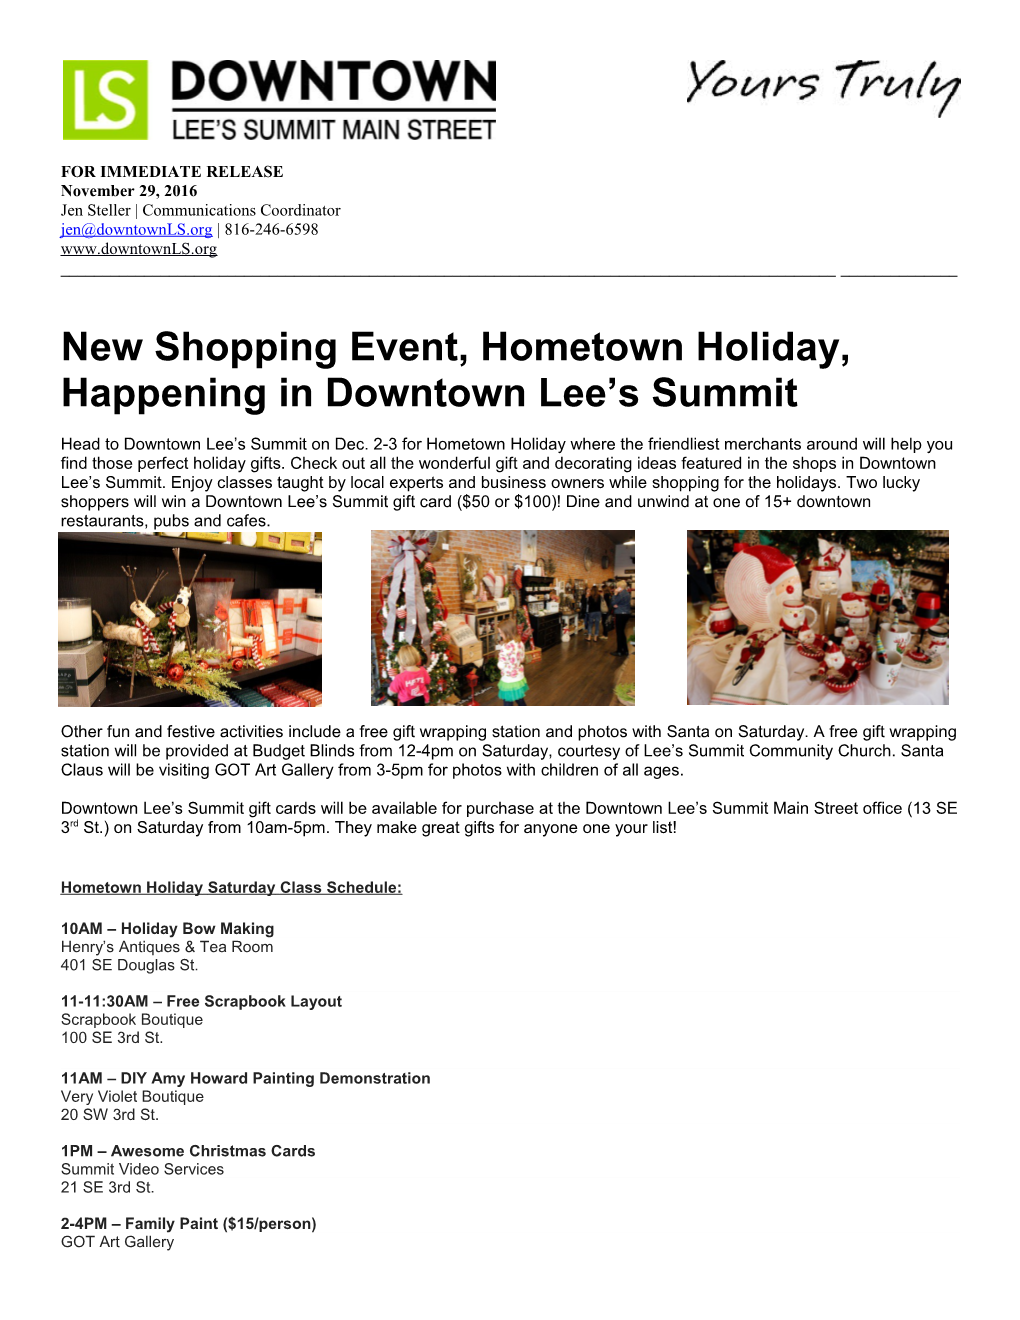 New Shopping Event, Hometown Holiday, Happening in Downtown Lee S Summit